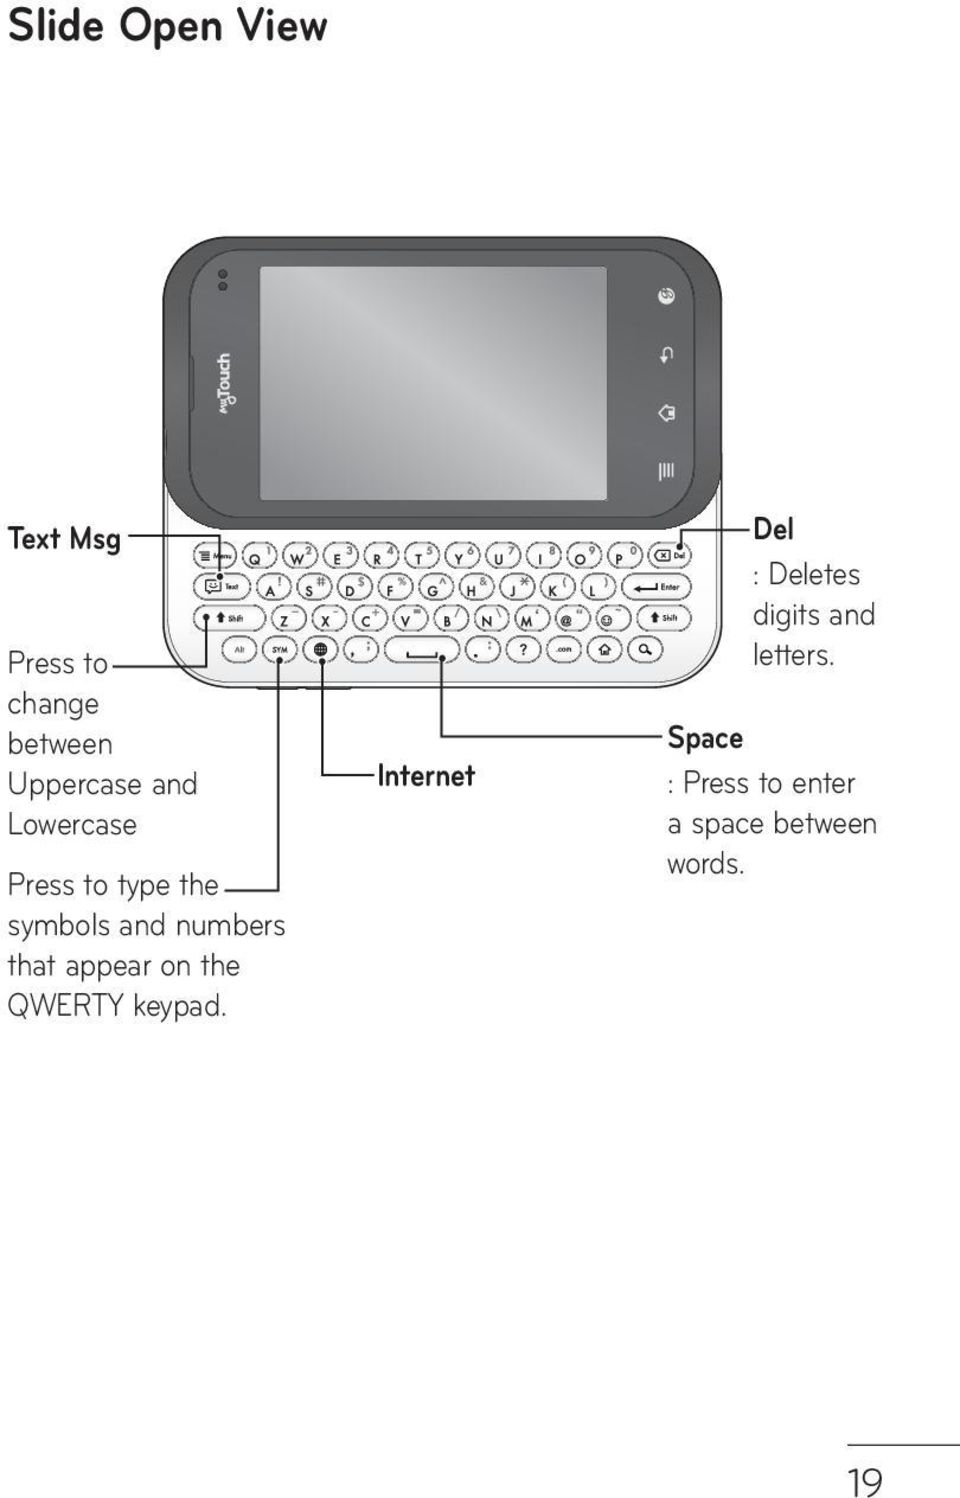 appear on the QWERTY keypad.